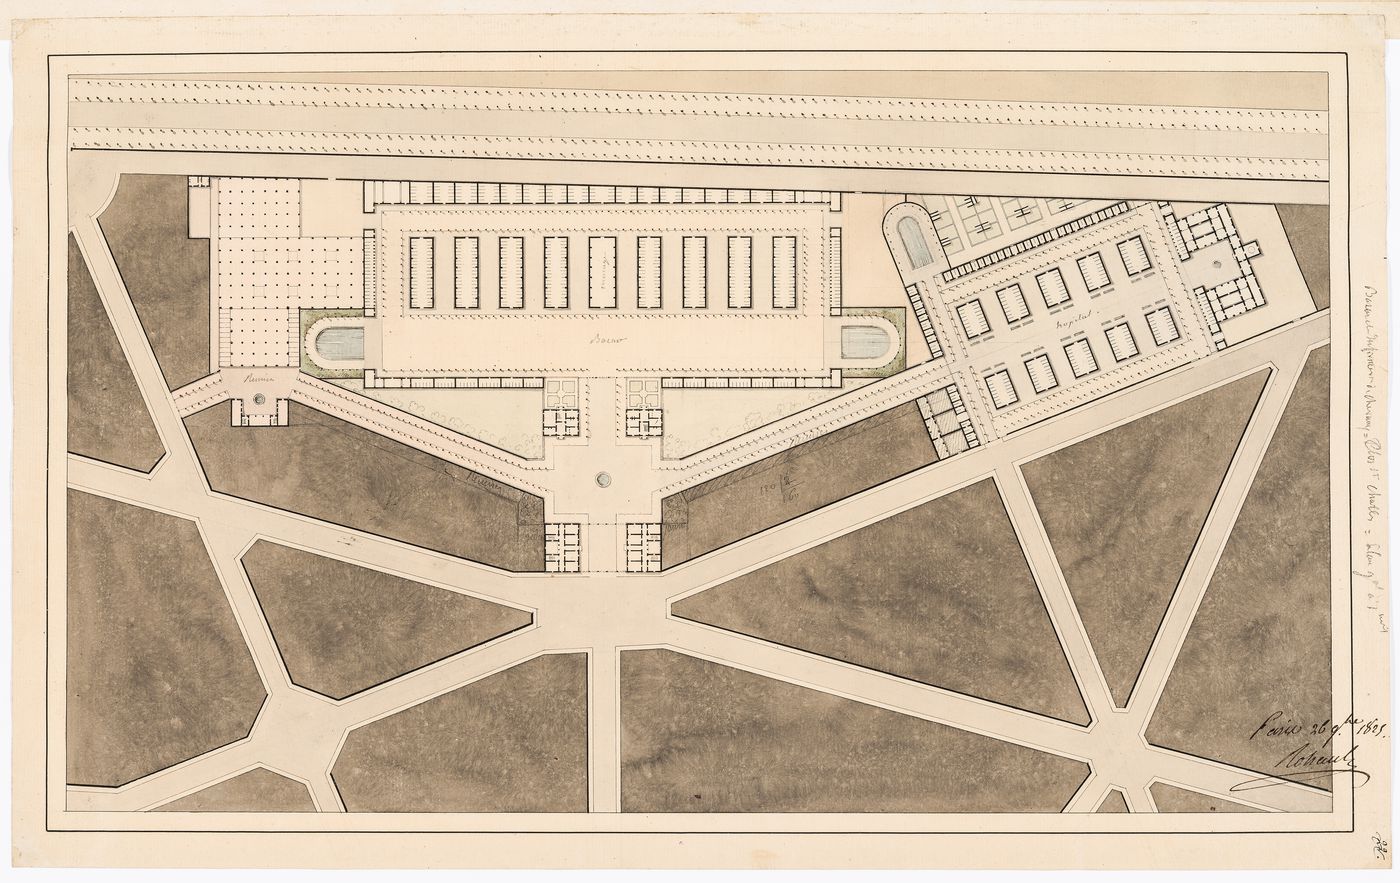 Project for a horse auction house and infirmary, Clos St. Charles, nouveau quartier Poissonnière: Site plan showing the ground floor